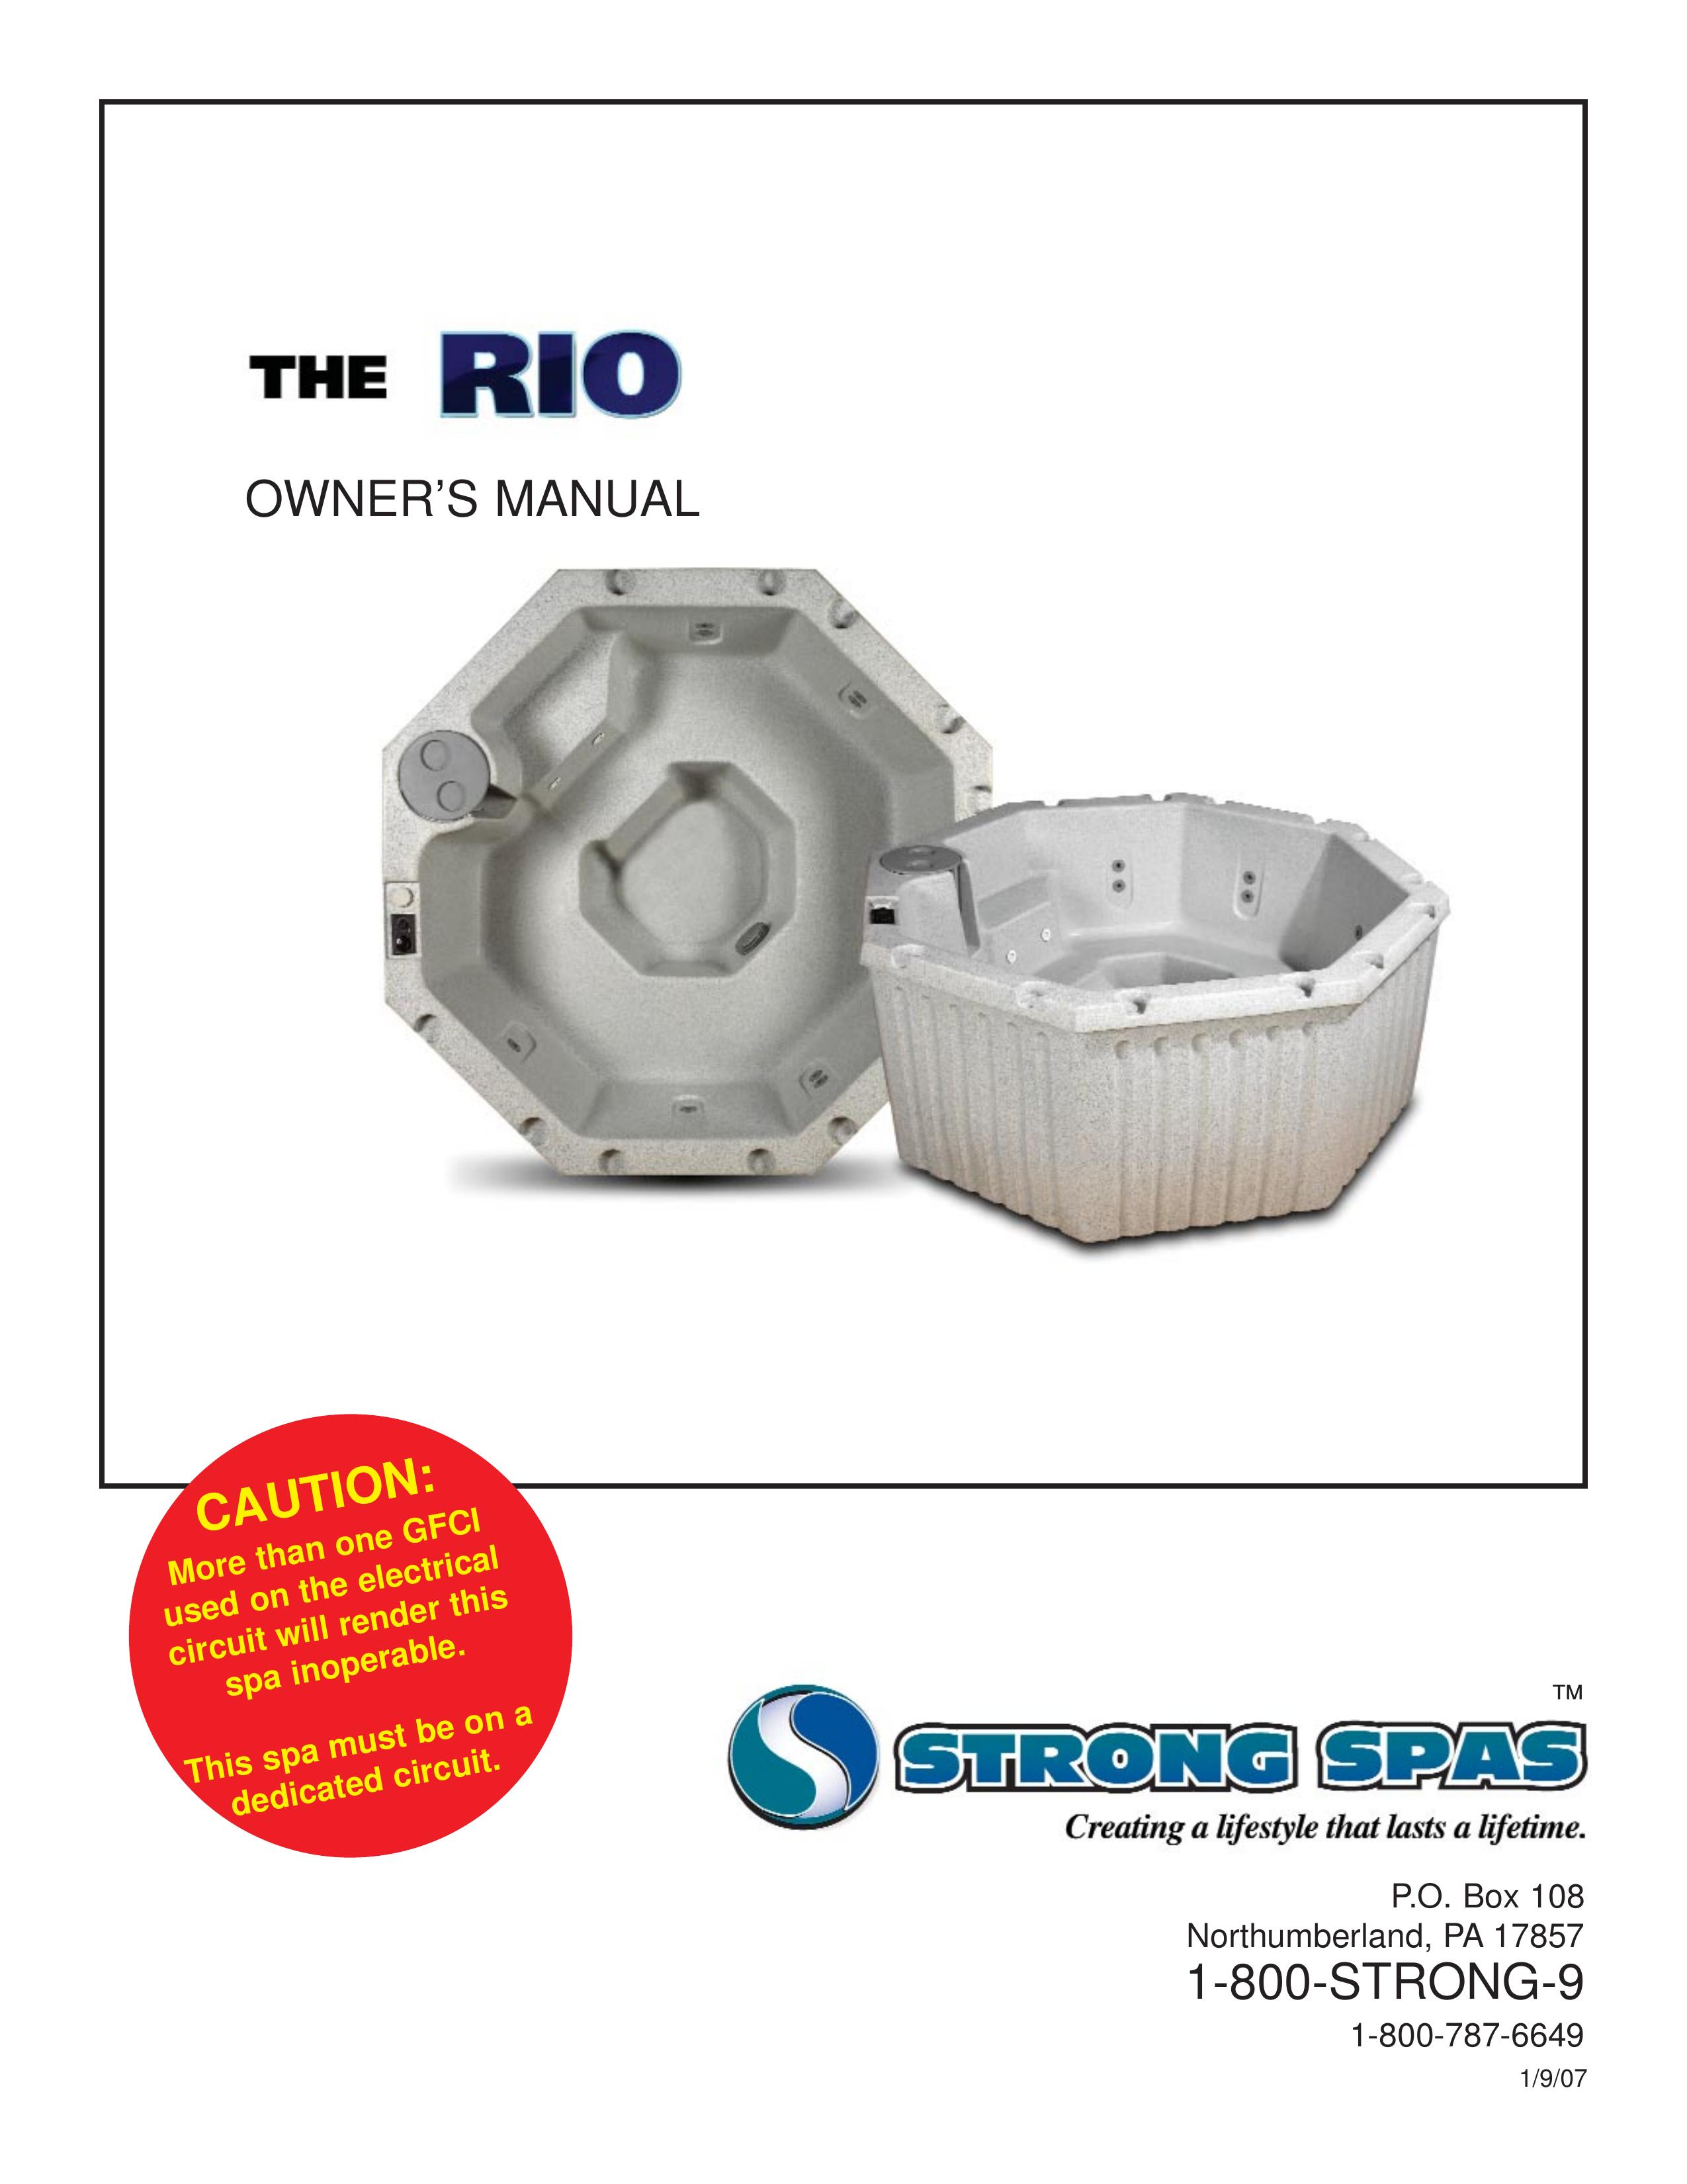 Strong Pools and Spas Rotational Molded resin whirlpool spa Hot Tub User Manual